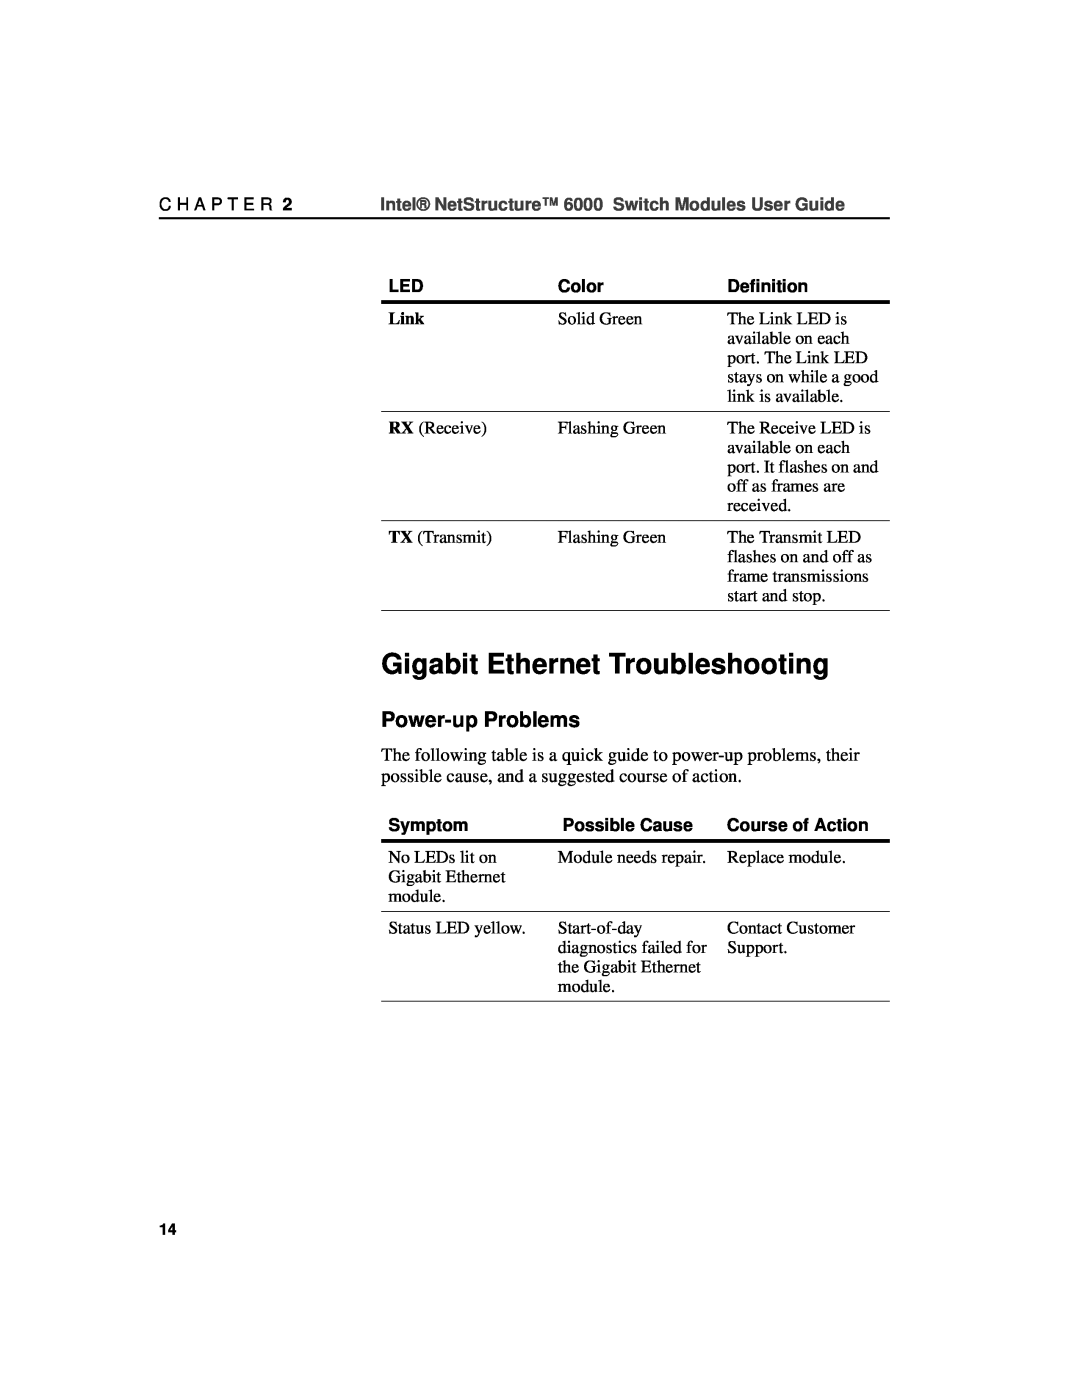 Intel A21721-001 Gigabit Ethernet Troubleshooting, Power-up Problems, Intel NetStructure 6000 Switch Modules User Guide 